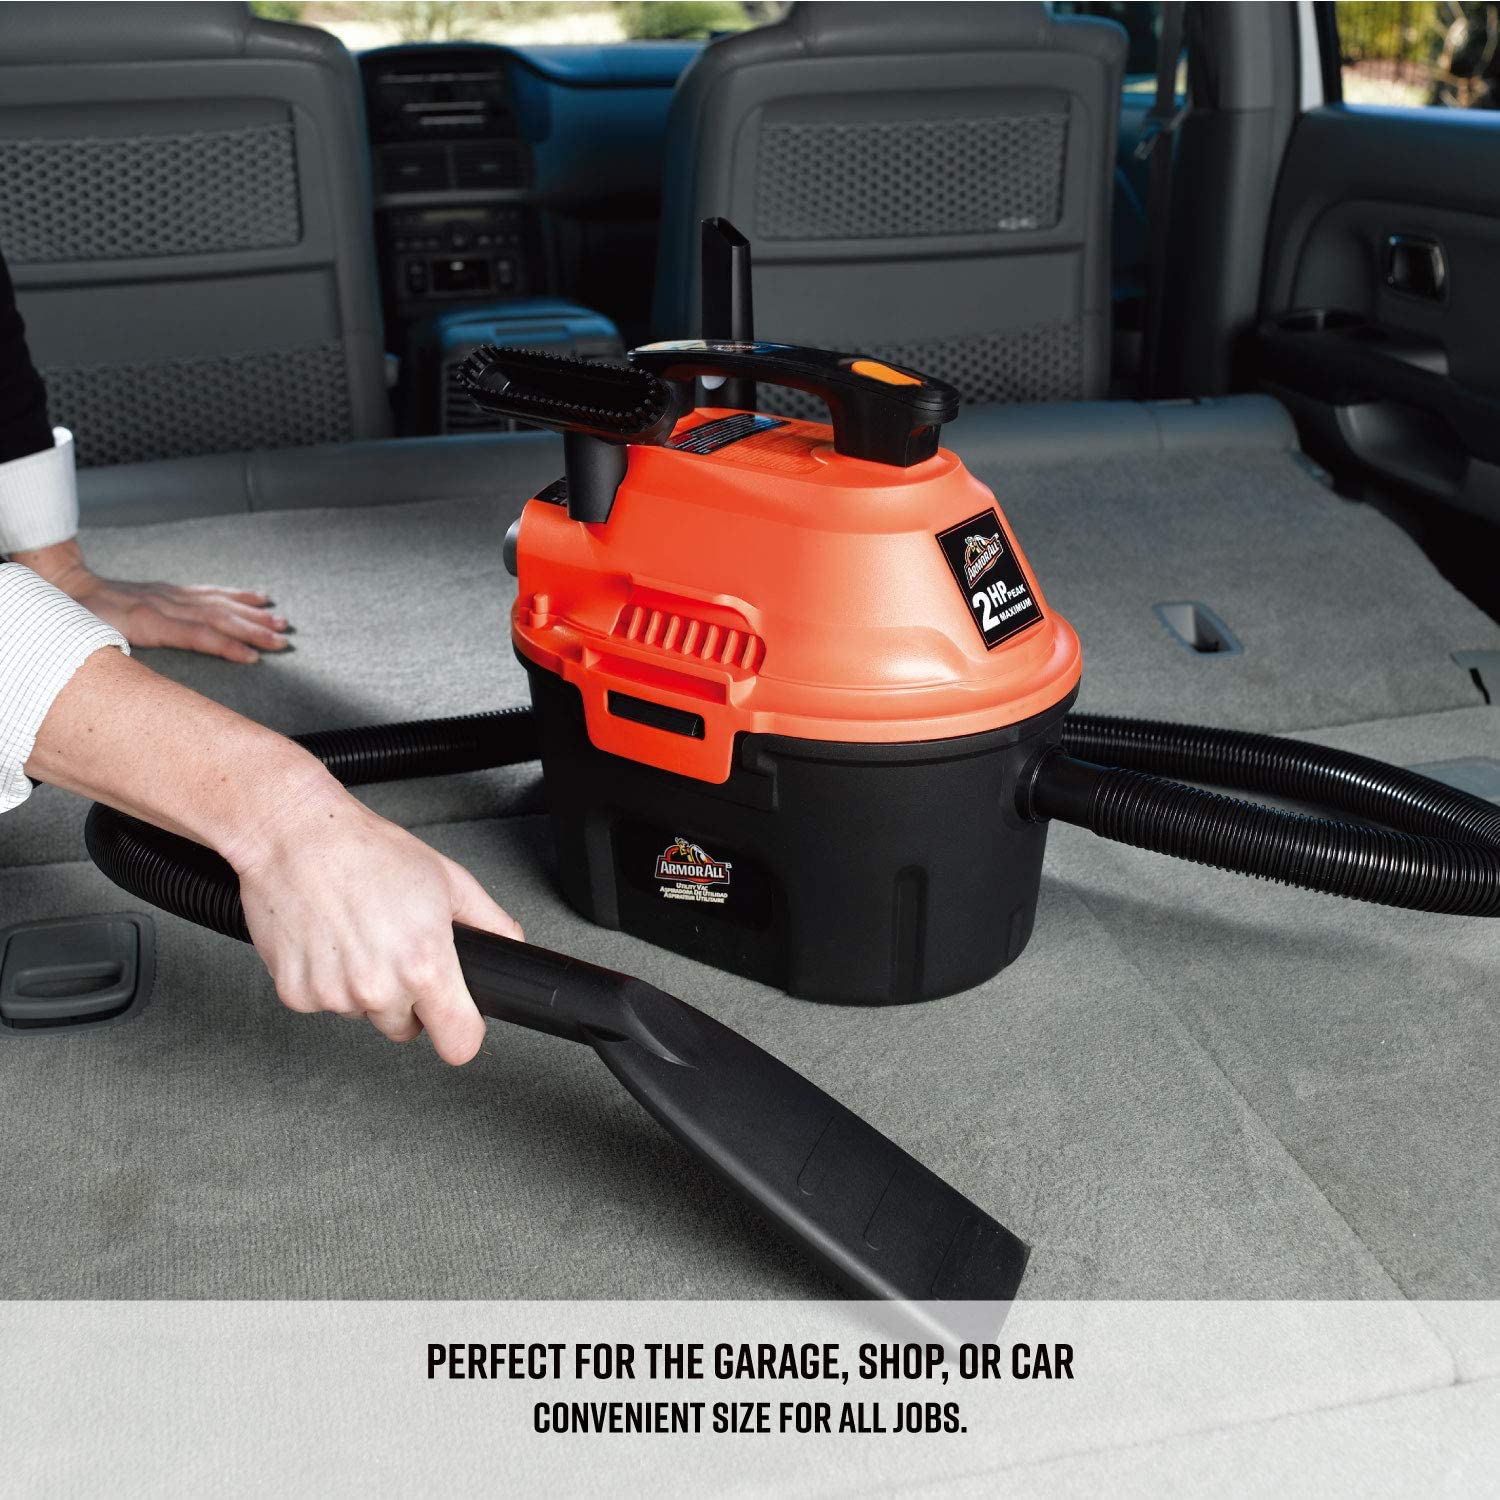 Top 5 Best Vacuums for Car Detailing in 2022